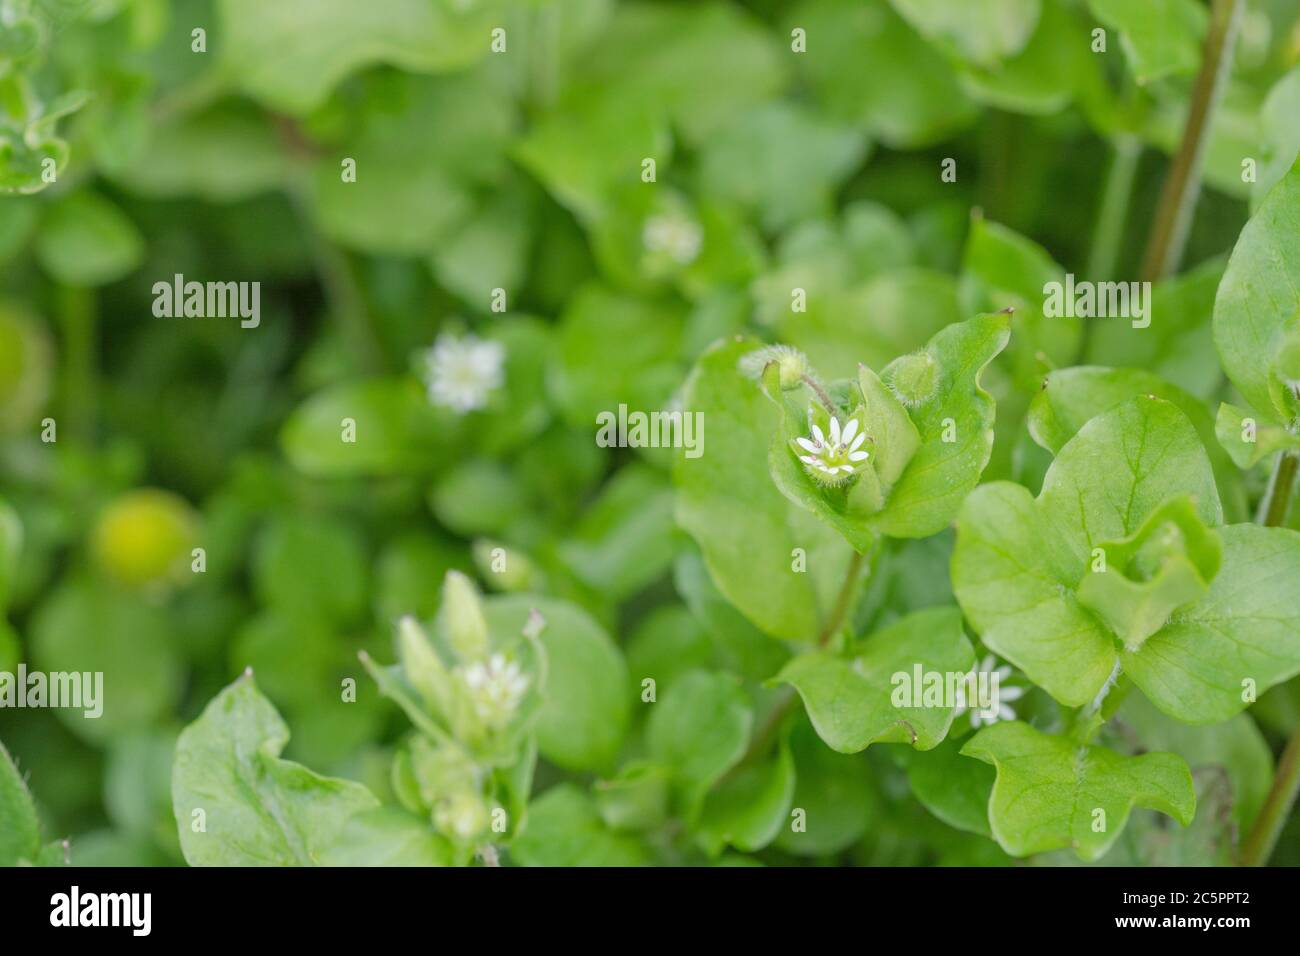 Macro close-up of Chickweed / Stellaria media growing in field. Common UK weed once used as medicinal plant for herbal remedies. Also edible. Stock Photo